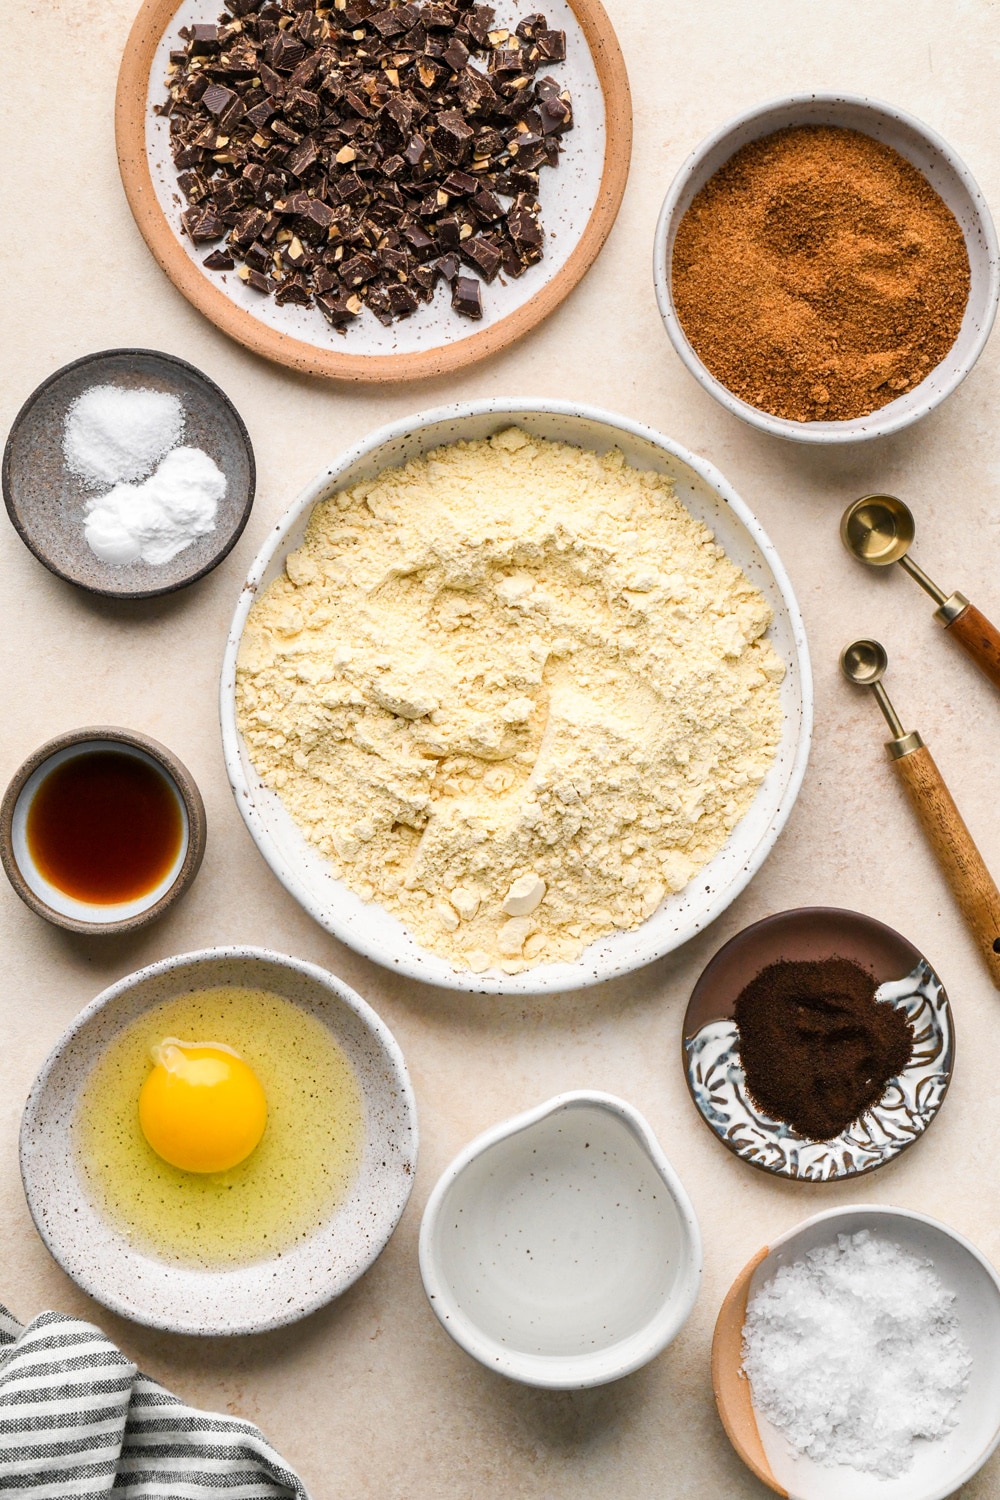 Ingredients for chocolate espresso chickpea flour cookies in various ceramics on a light cream colored background.